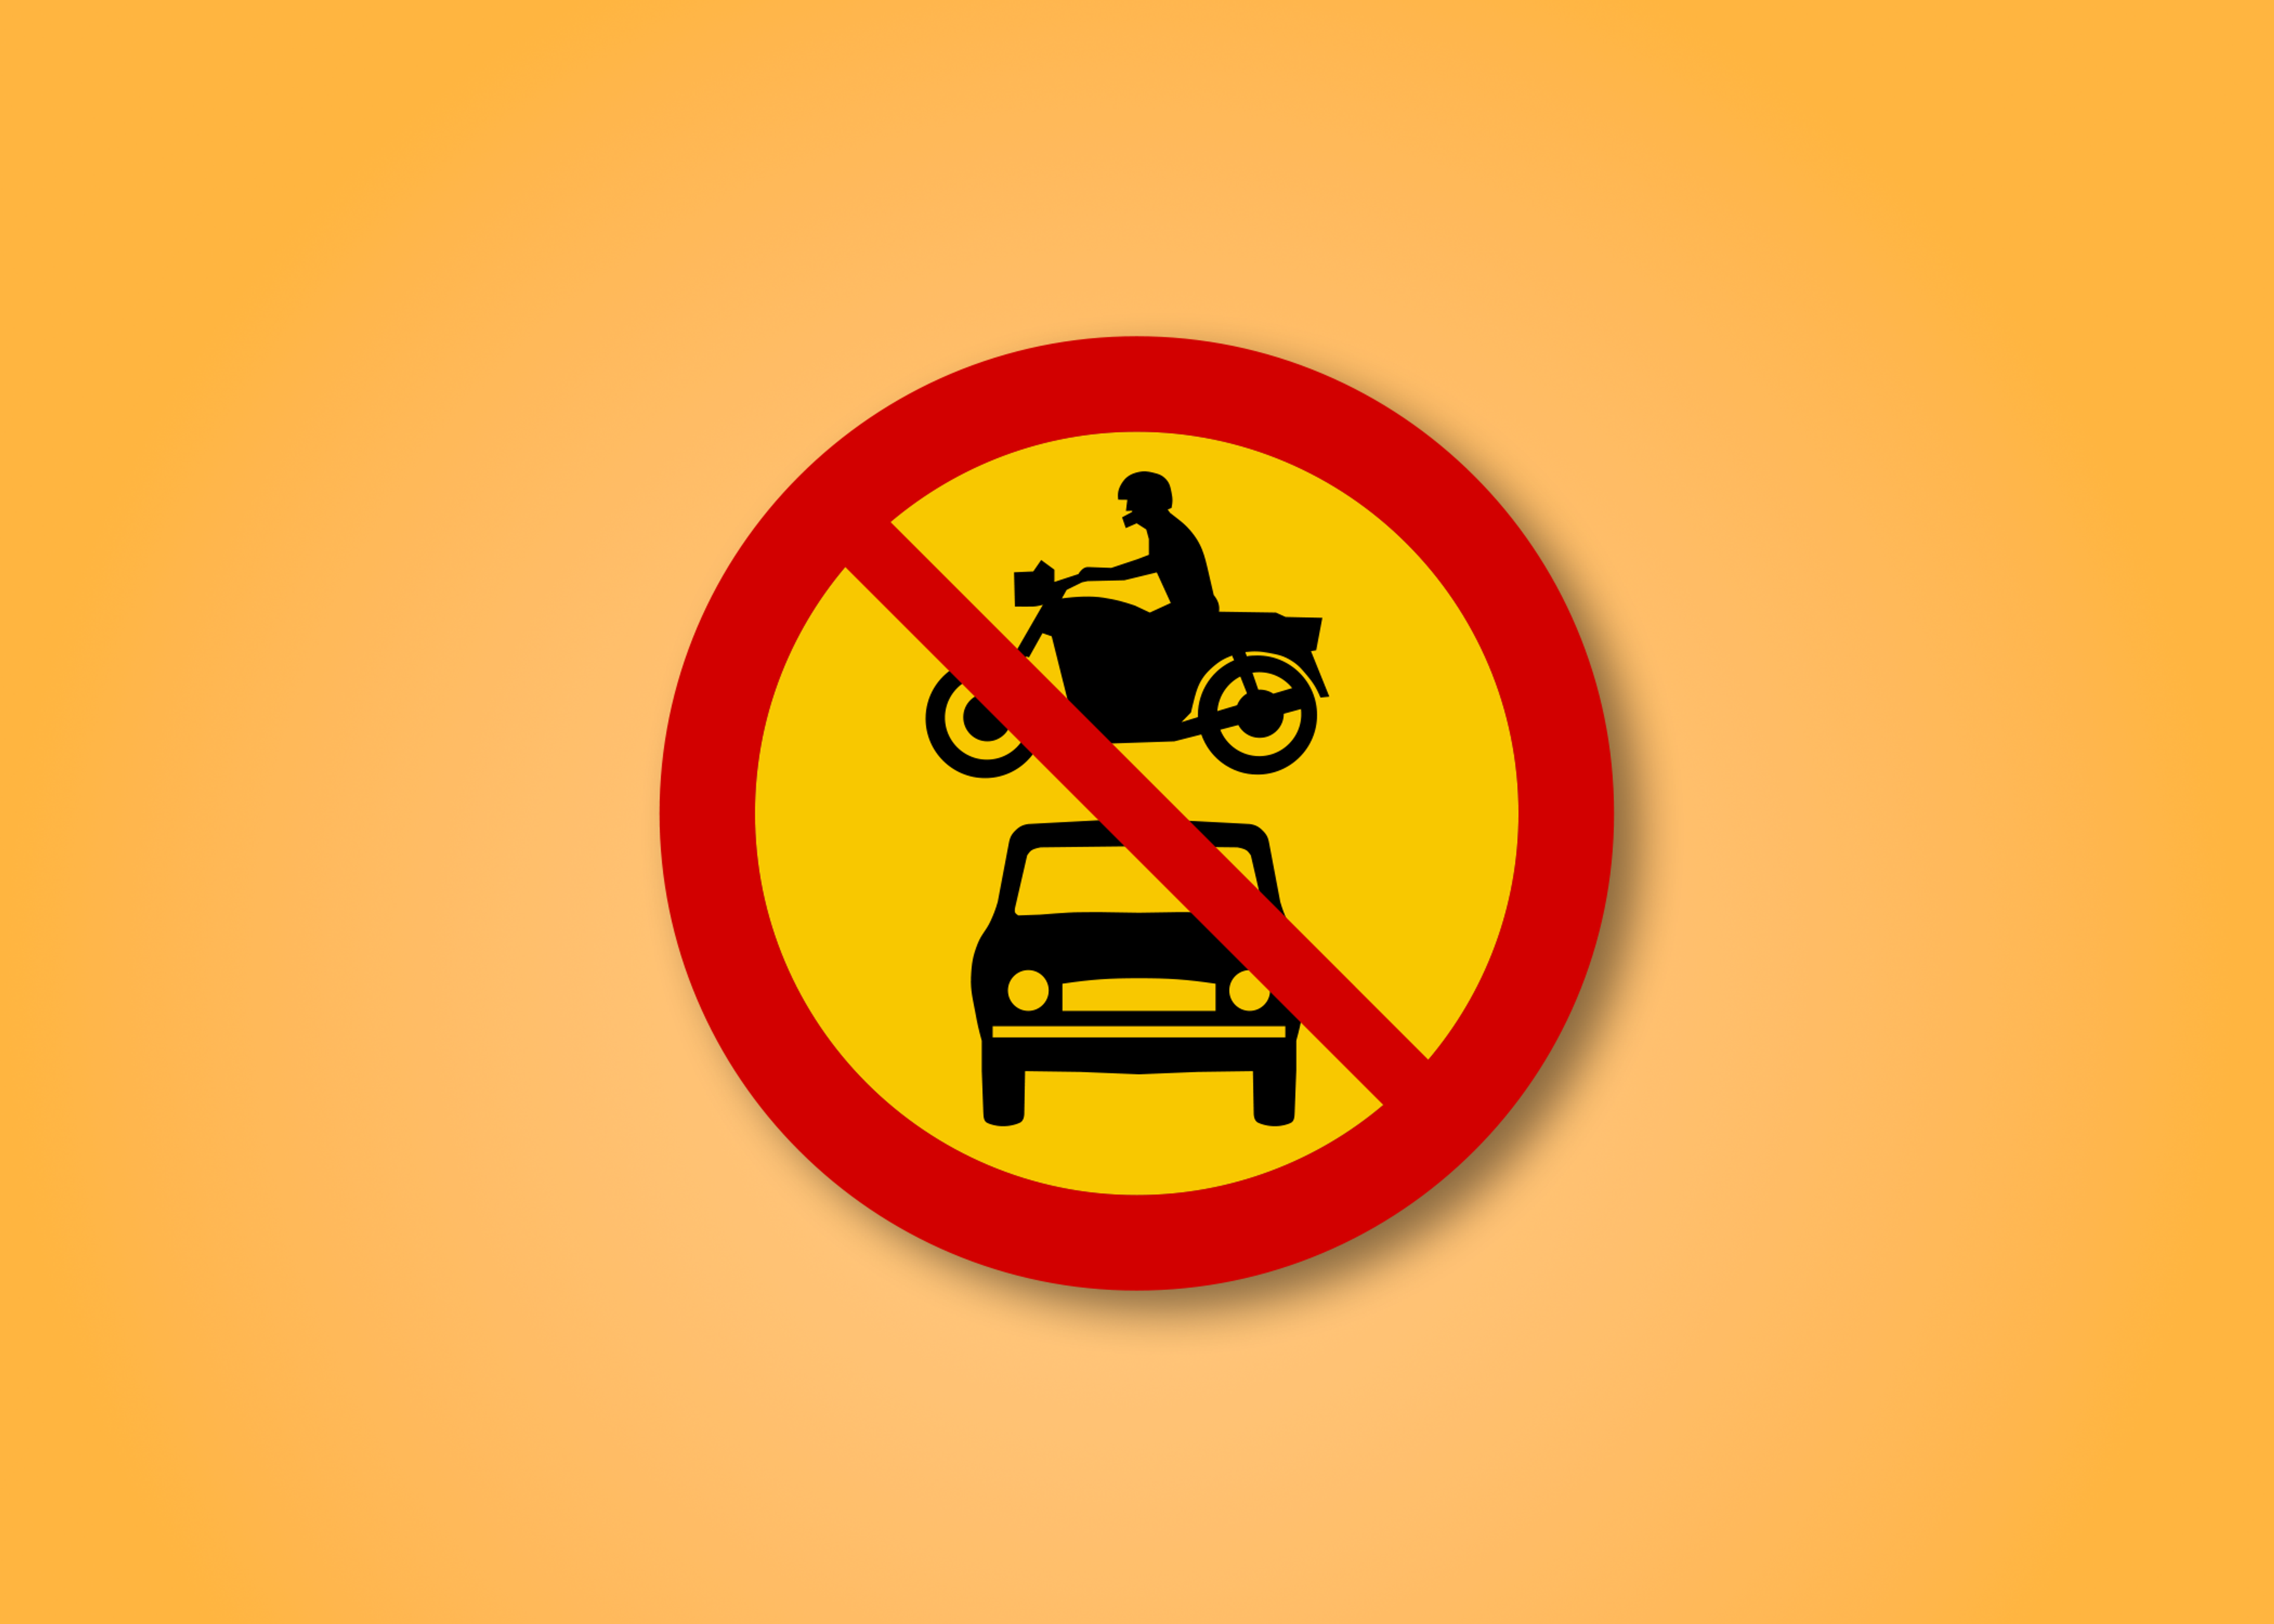 Red and yellow circle road sign with a rental car and a motorcycle in the middle. This road sign means No Motor Vehicles can enter.